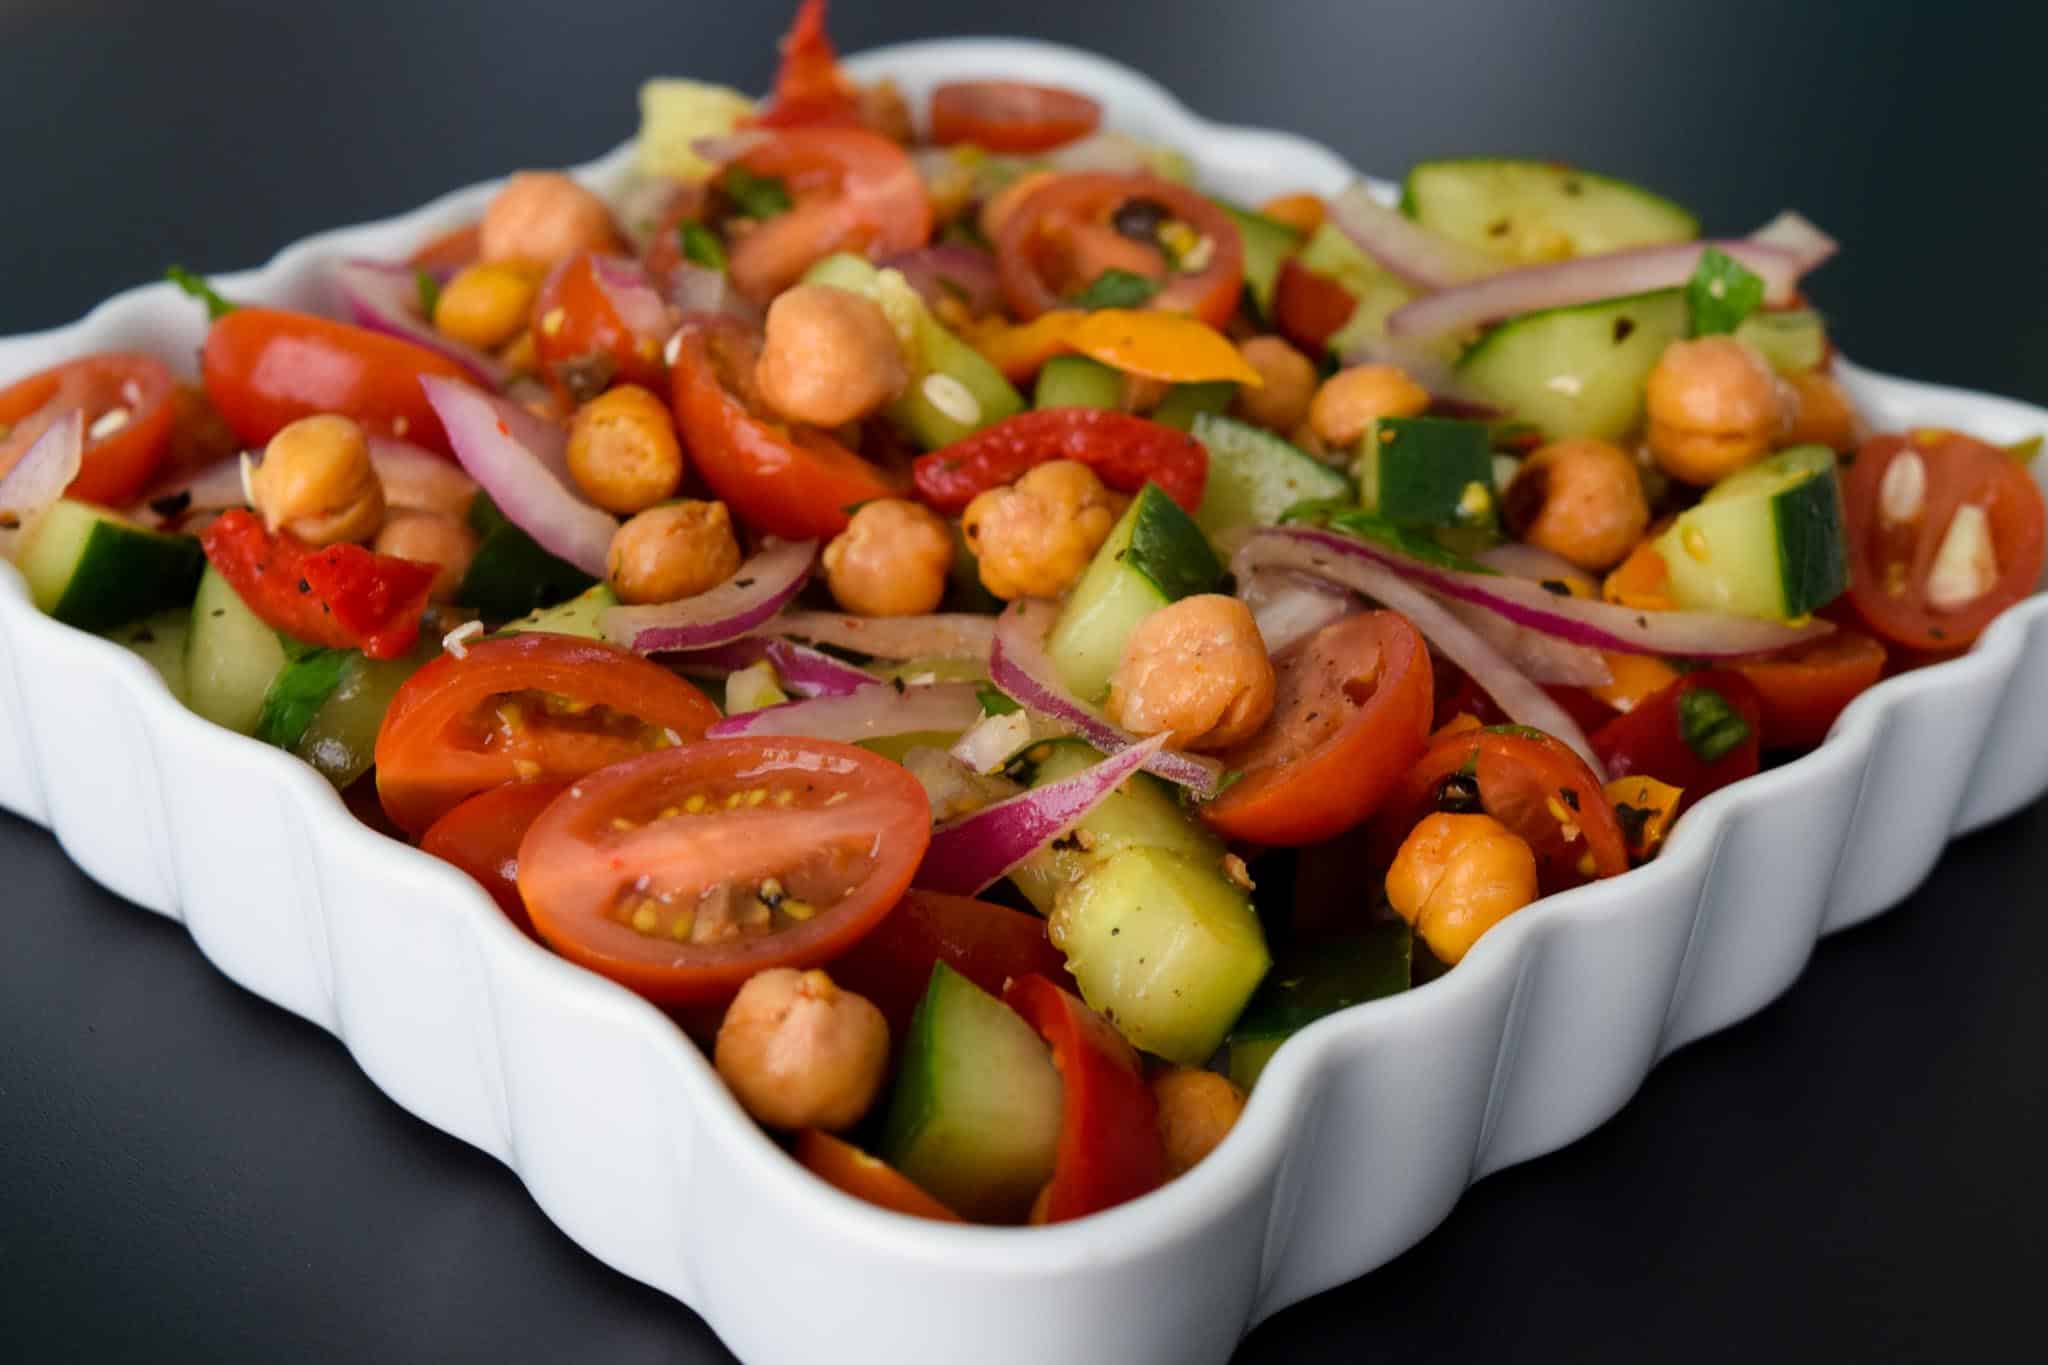 Roasted Chickpea Panzanella Salad in white serving tray close up view